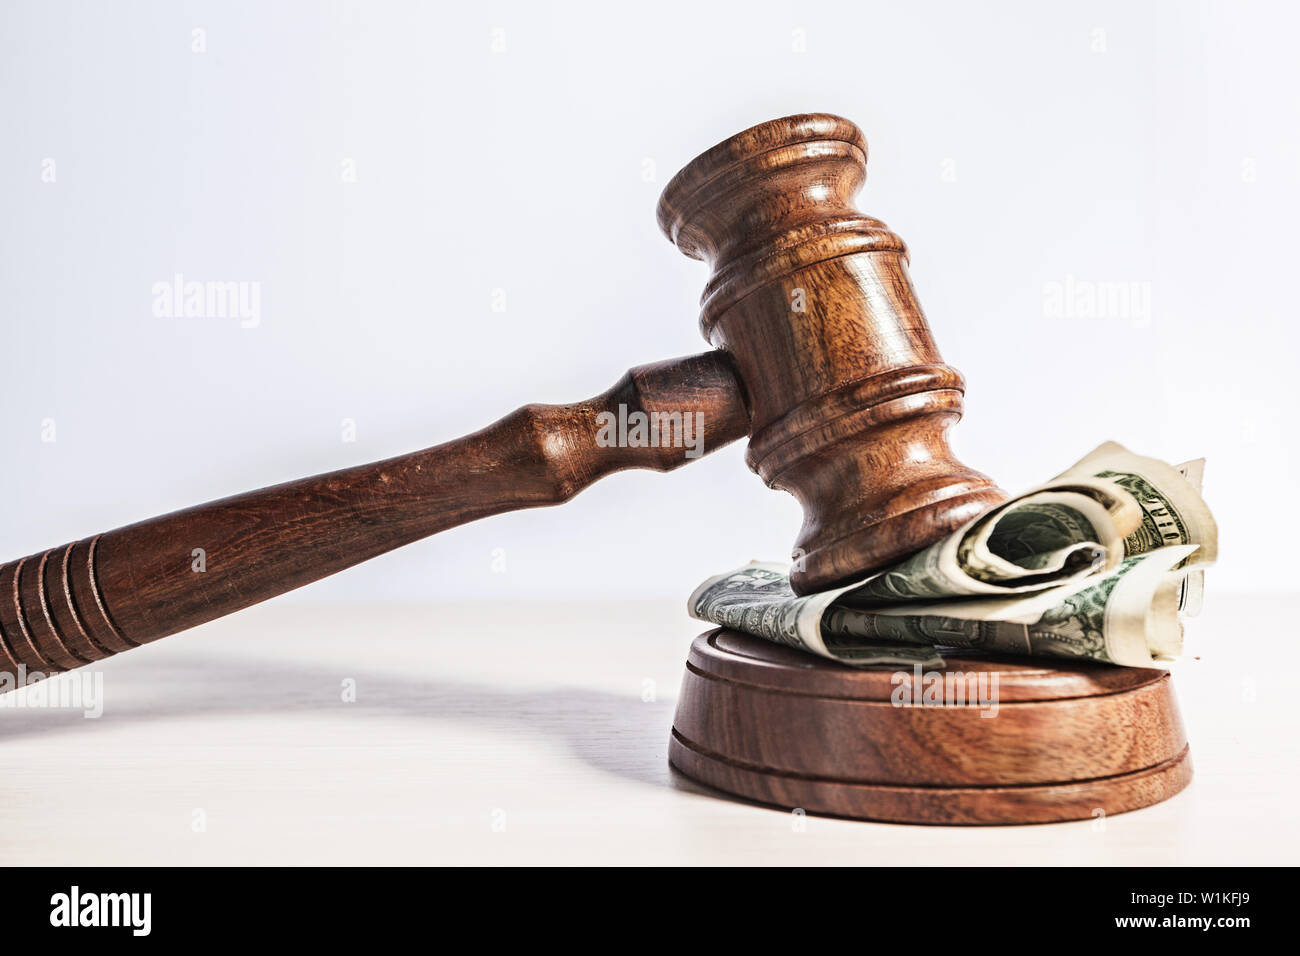 judge gavel and money on brown wooden table concept Stock Photo